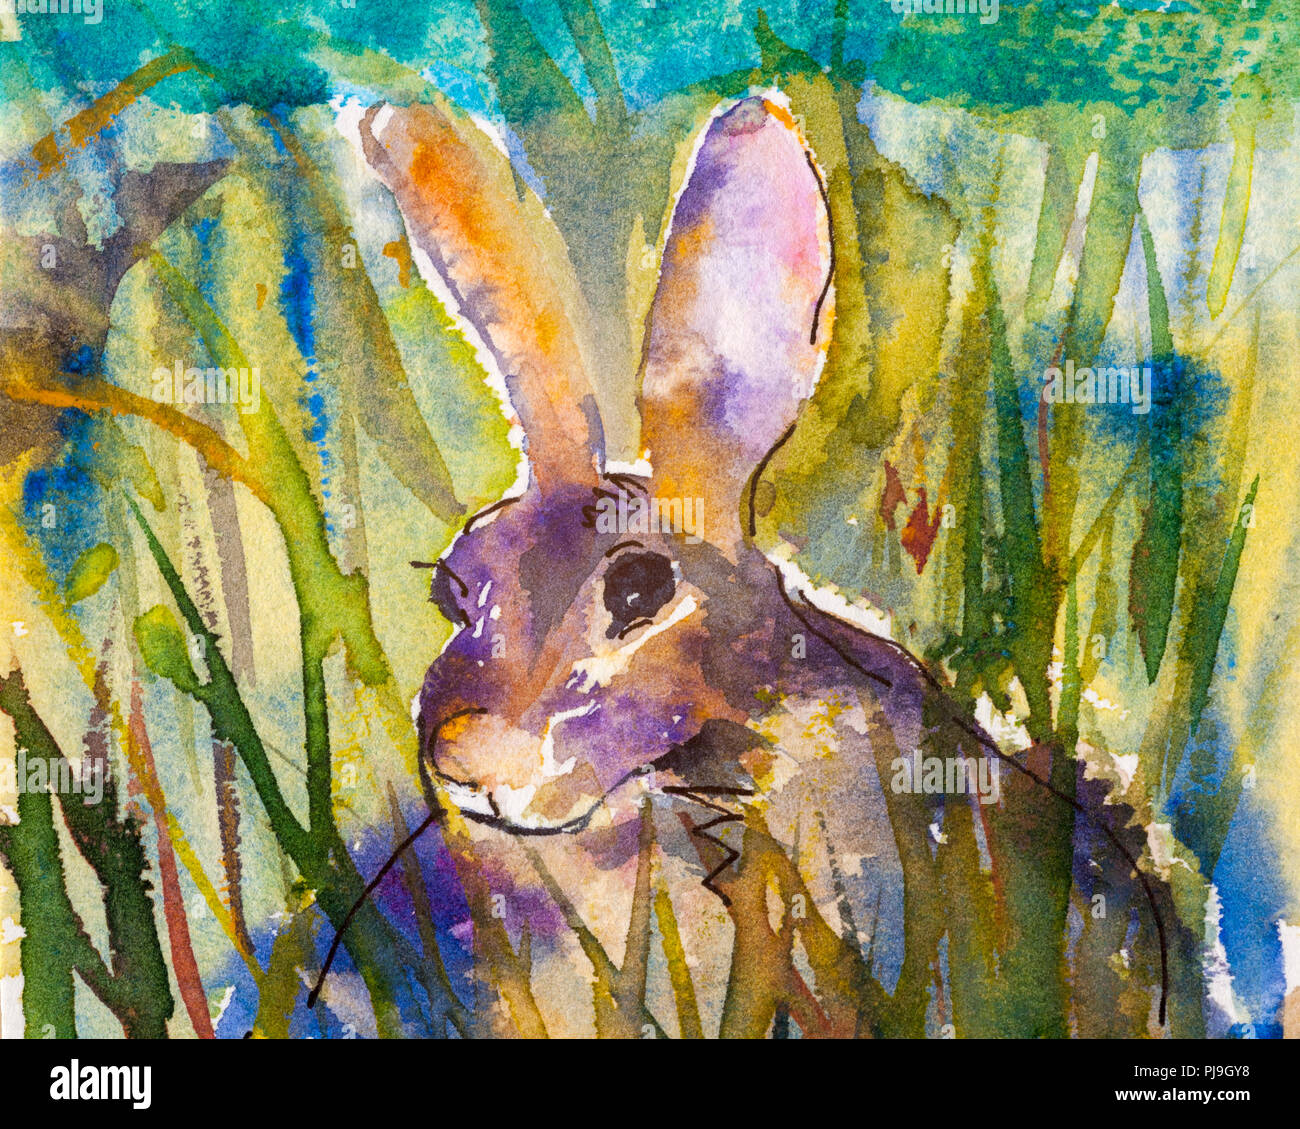 Details of watercolour painting studies for a wildlife illustration project showing colour, textures and techniques. A rabbit. Stock Photo